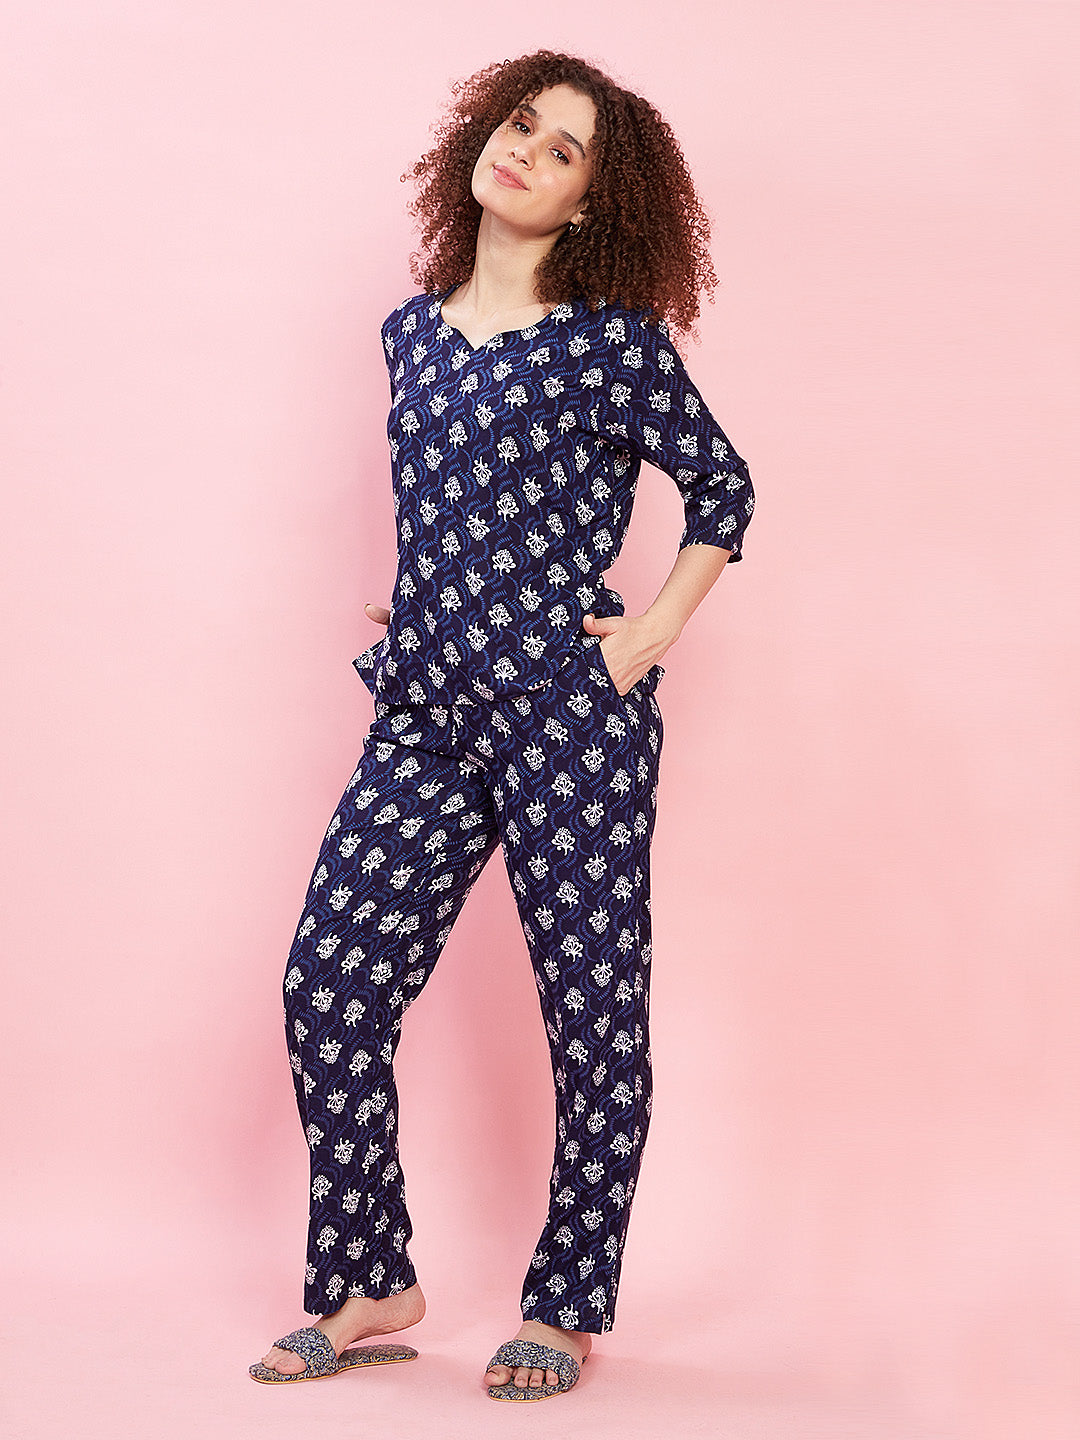 SuperSoft most comfortable 100% Mercerised compact Rayon Pajama  with Pocket. Really long lasting. You will love it. Our Guarantee.